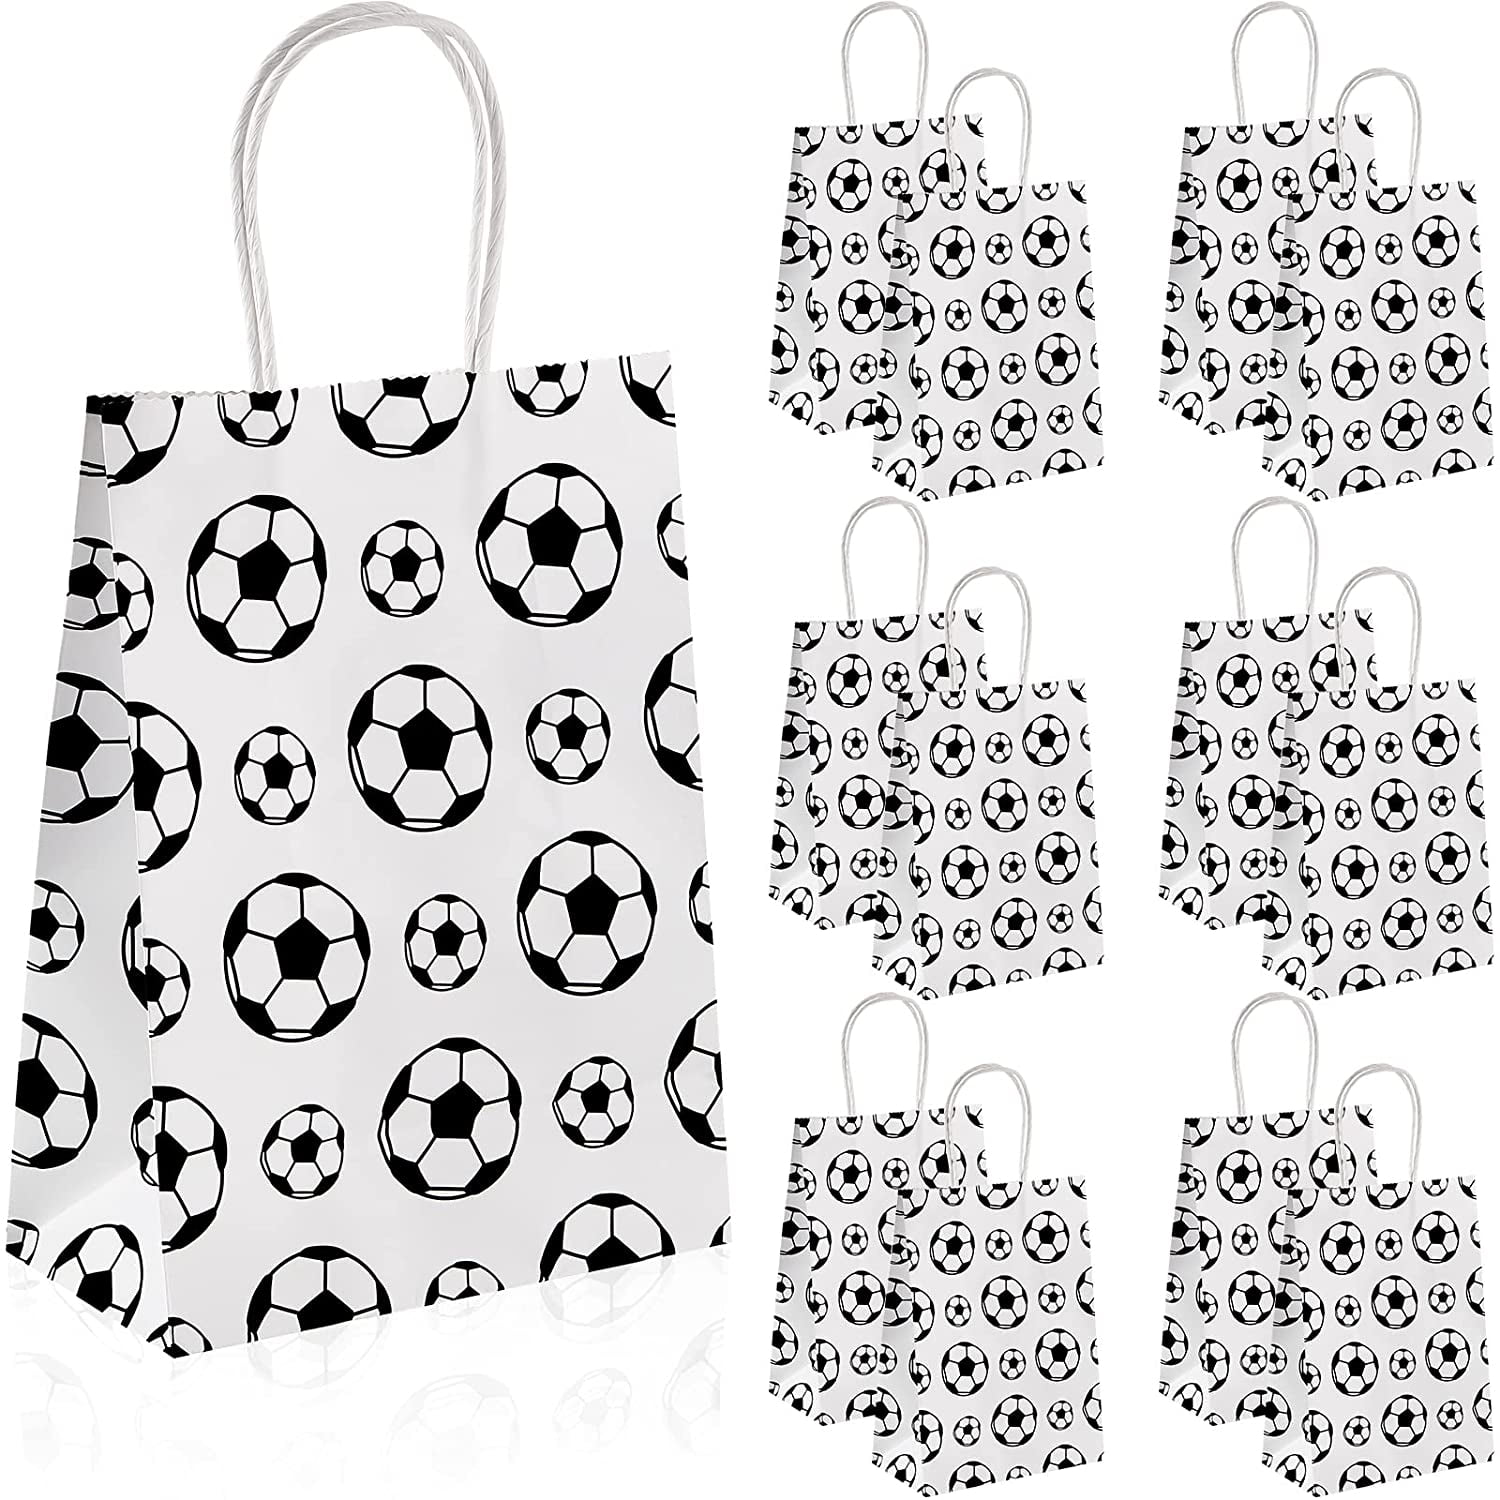 24 Pieces Paper Soccer Party Favor Bags Soccer Print Present Bags Goodie Bags Soccer Treat Candy Bags Soccer Snack Bags for Football Themed Kids Adults Birthday Party Supplies Decorations 